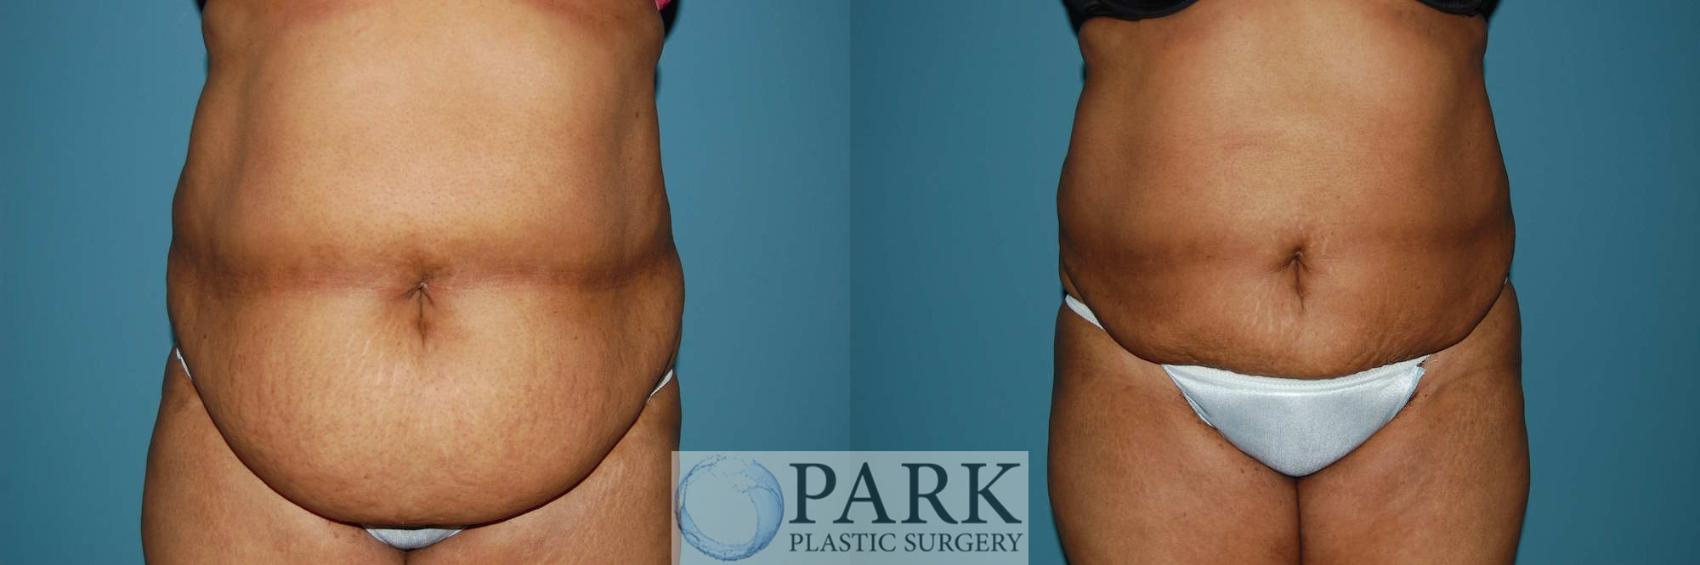 Before & After Liposuction Case 6 Front View in Rocky Mount, NC